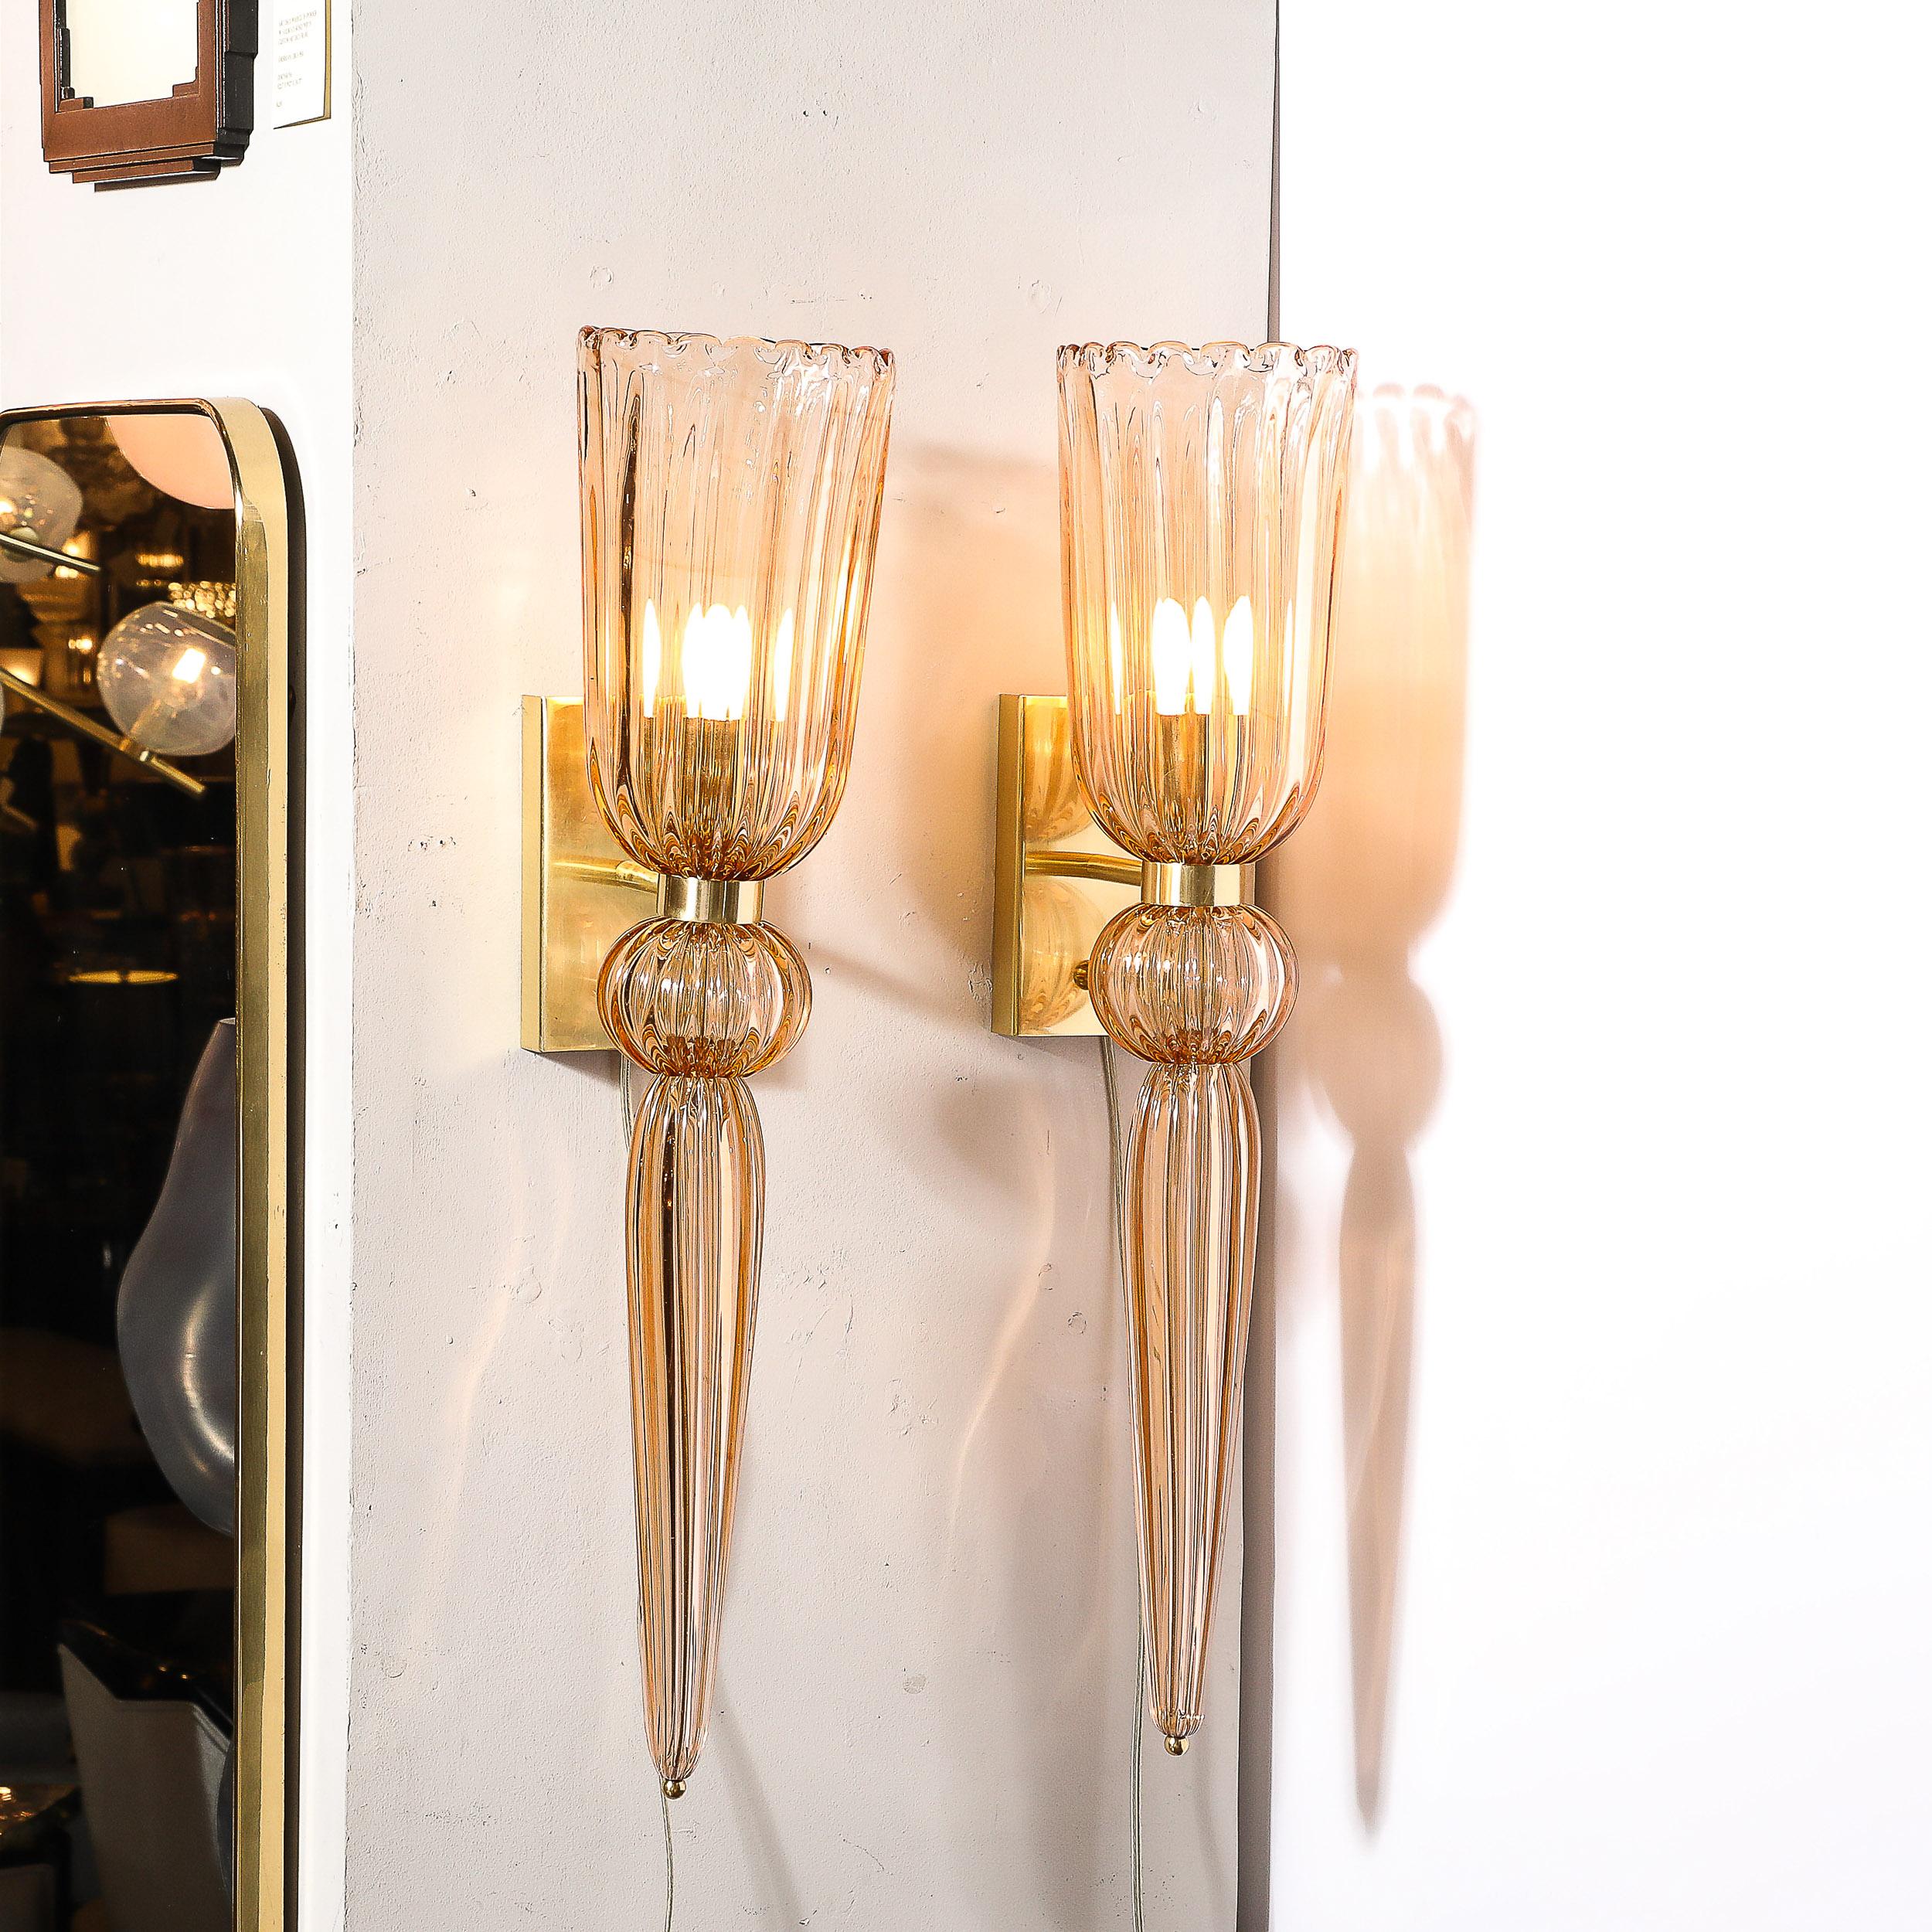 This gleaming and elegant Pair of Modernist Smoked Rose Hand-Blown Murano Glass & Brass Sconces W/ Elongated Drop originates from Italy during the 21st Century. Featuring a beautiful elongated form with fluted detailing across the variety of glass